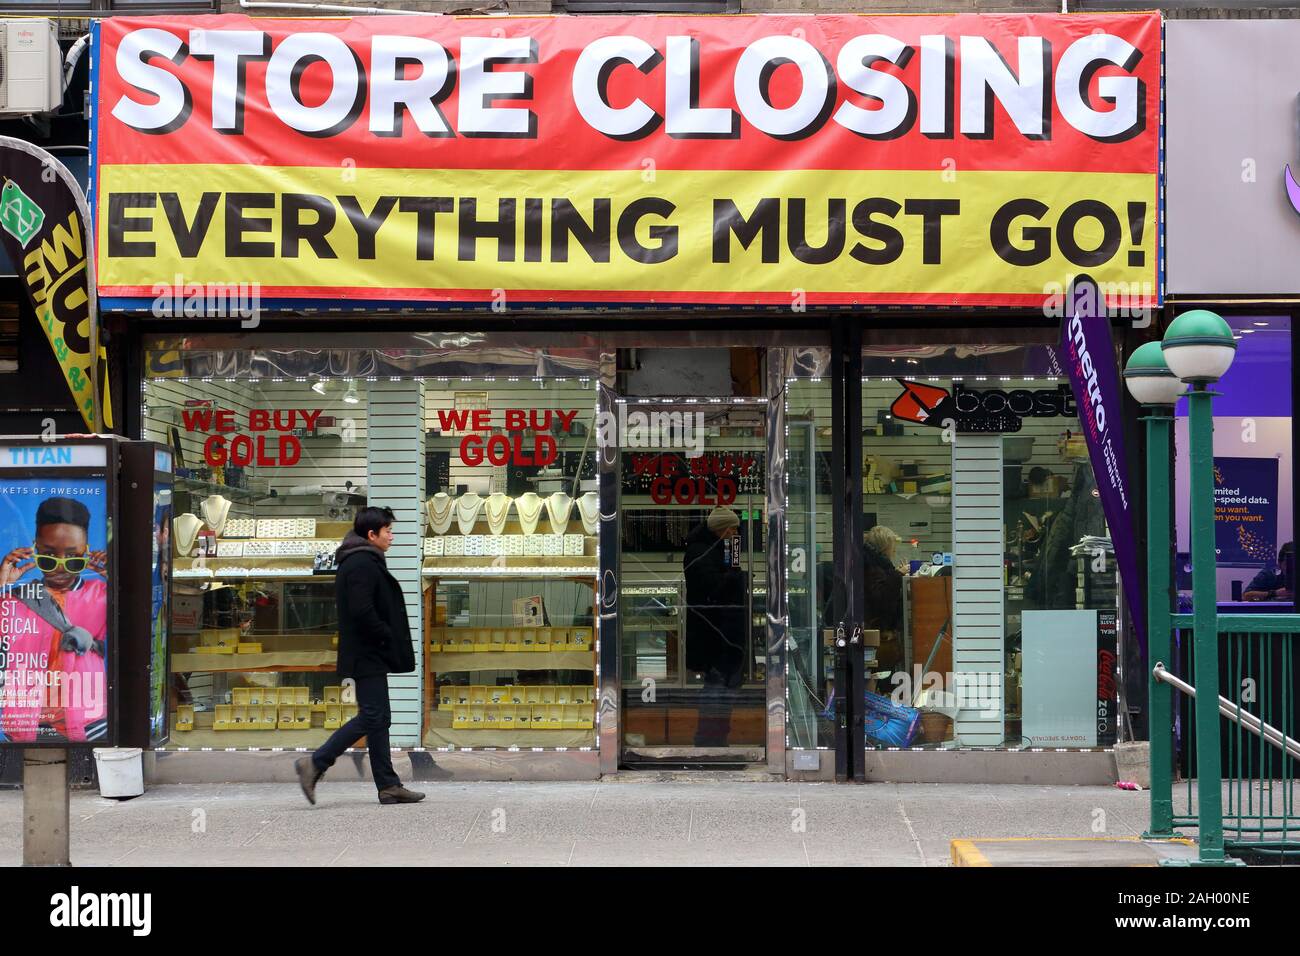 A gigantic 'Store Closing Everything Must Go' banner adorns a storefront in New York City. A true going out of business sale, or a questionable busine Stock Photo